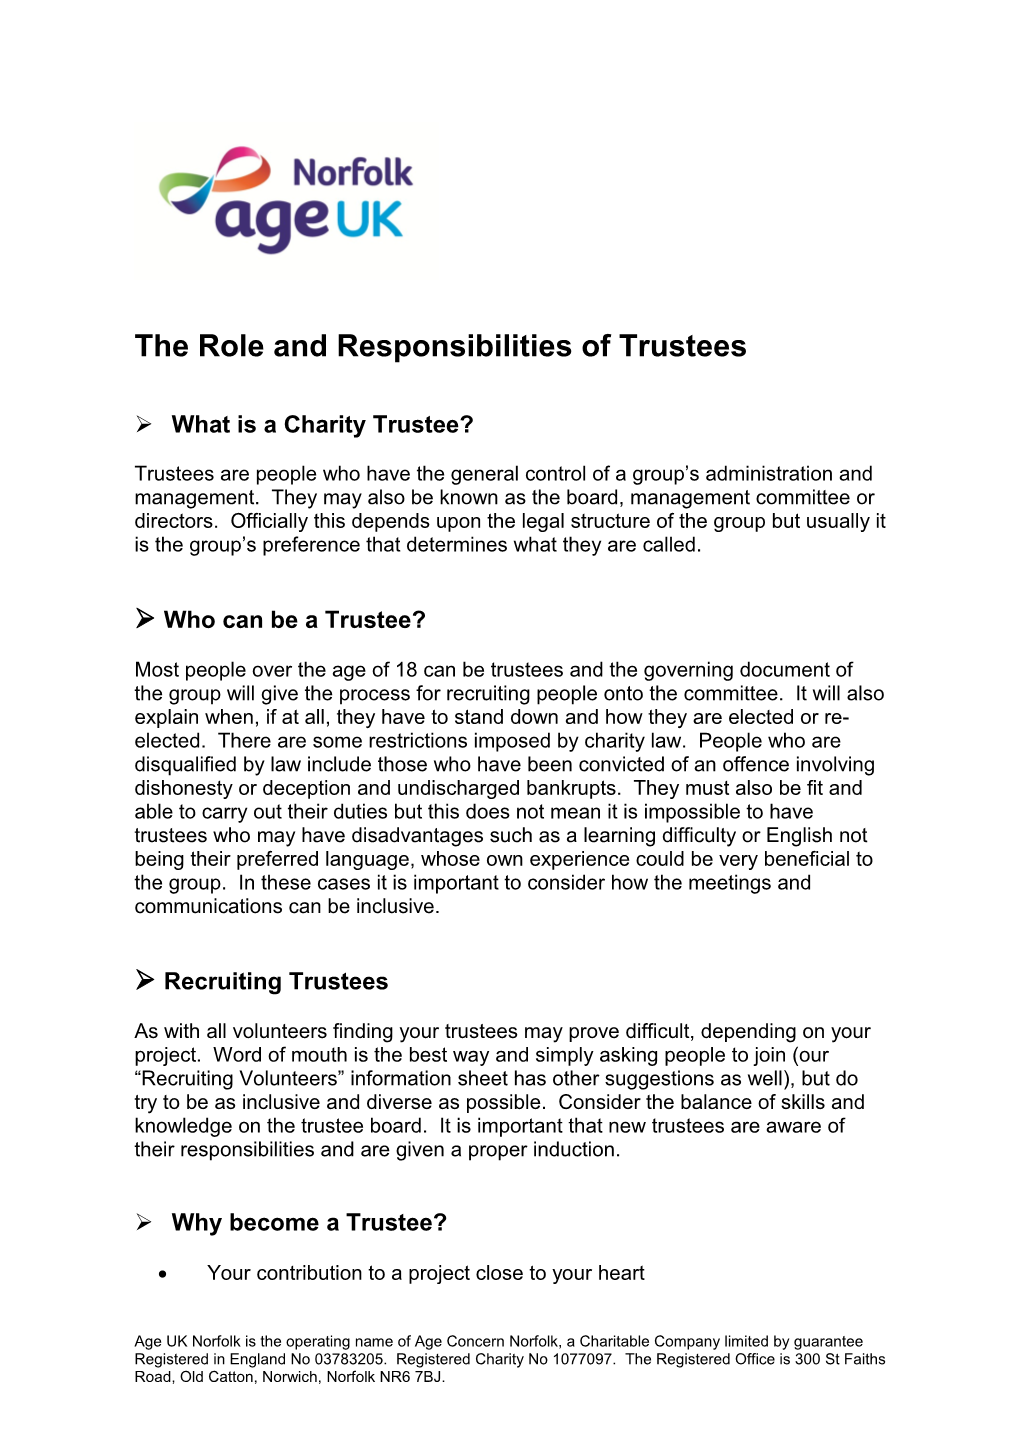 The Role and Responsibilities of Trustees